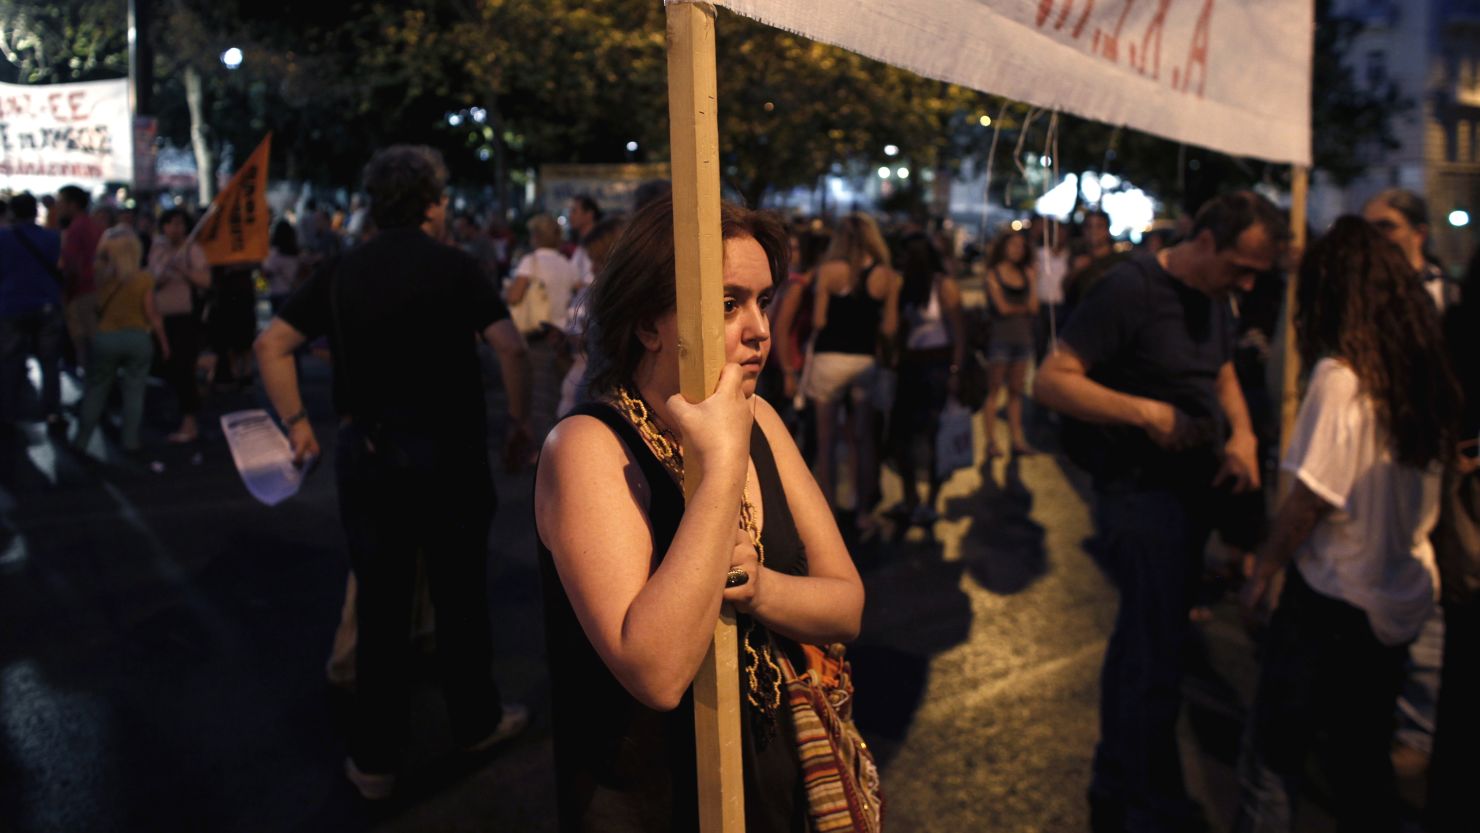 A protestor holding a banner against the Greek Government takes part in a demonstration on July 15, 2013 in Athens.